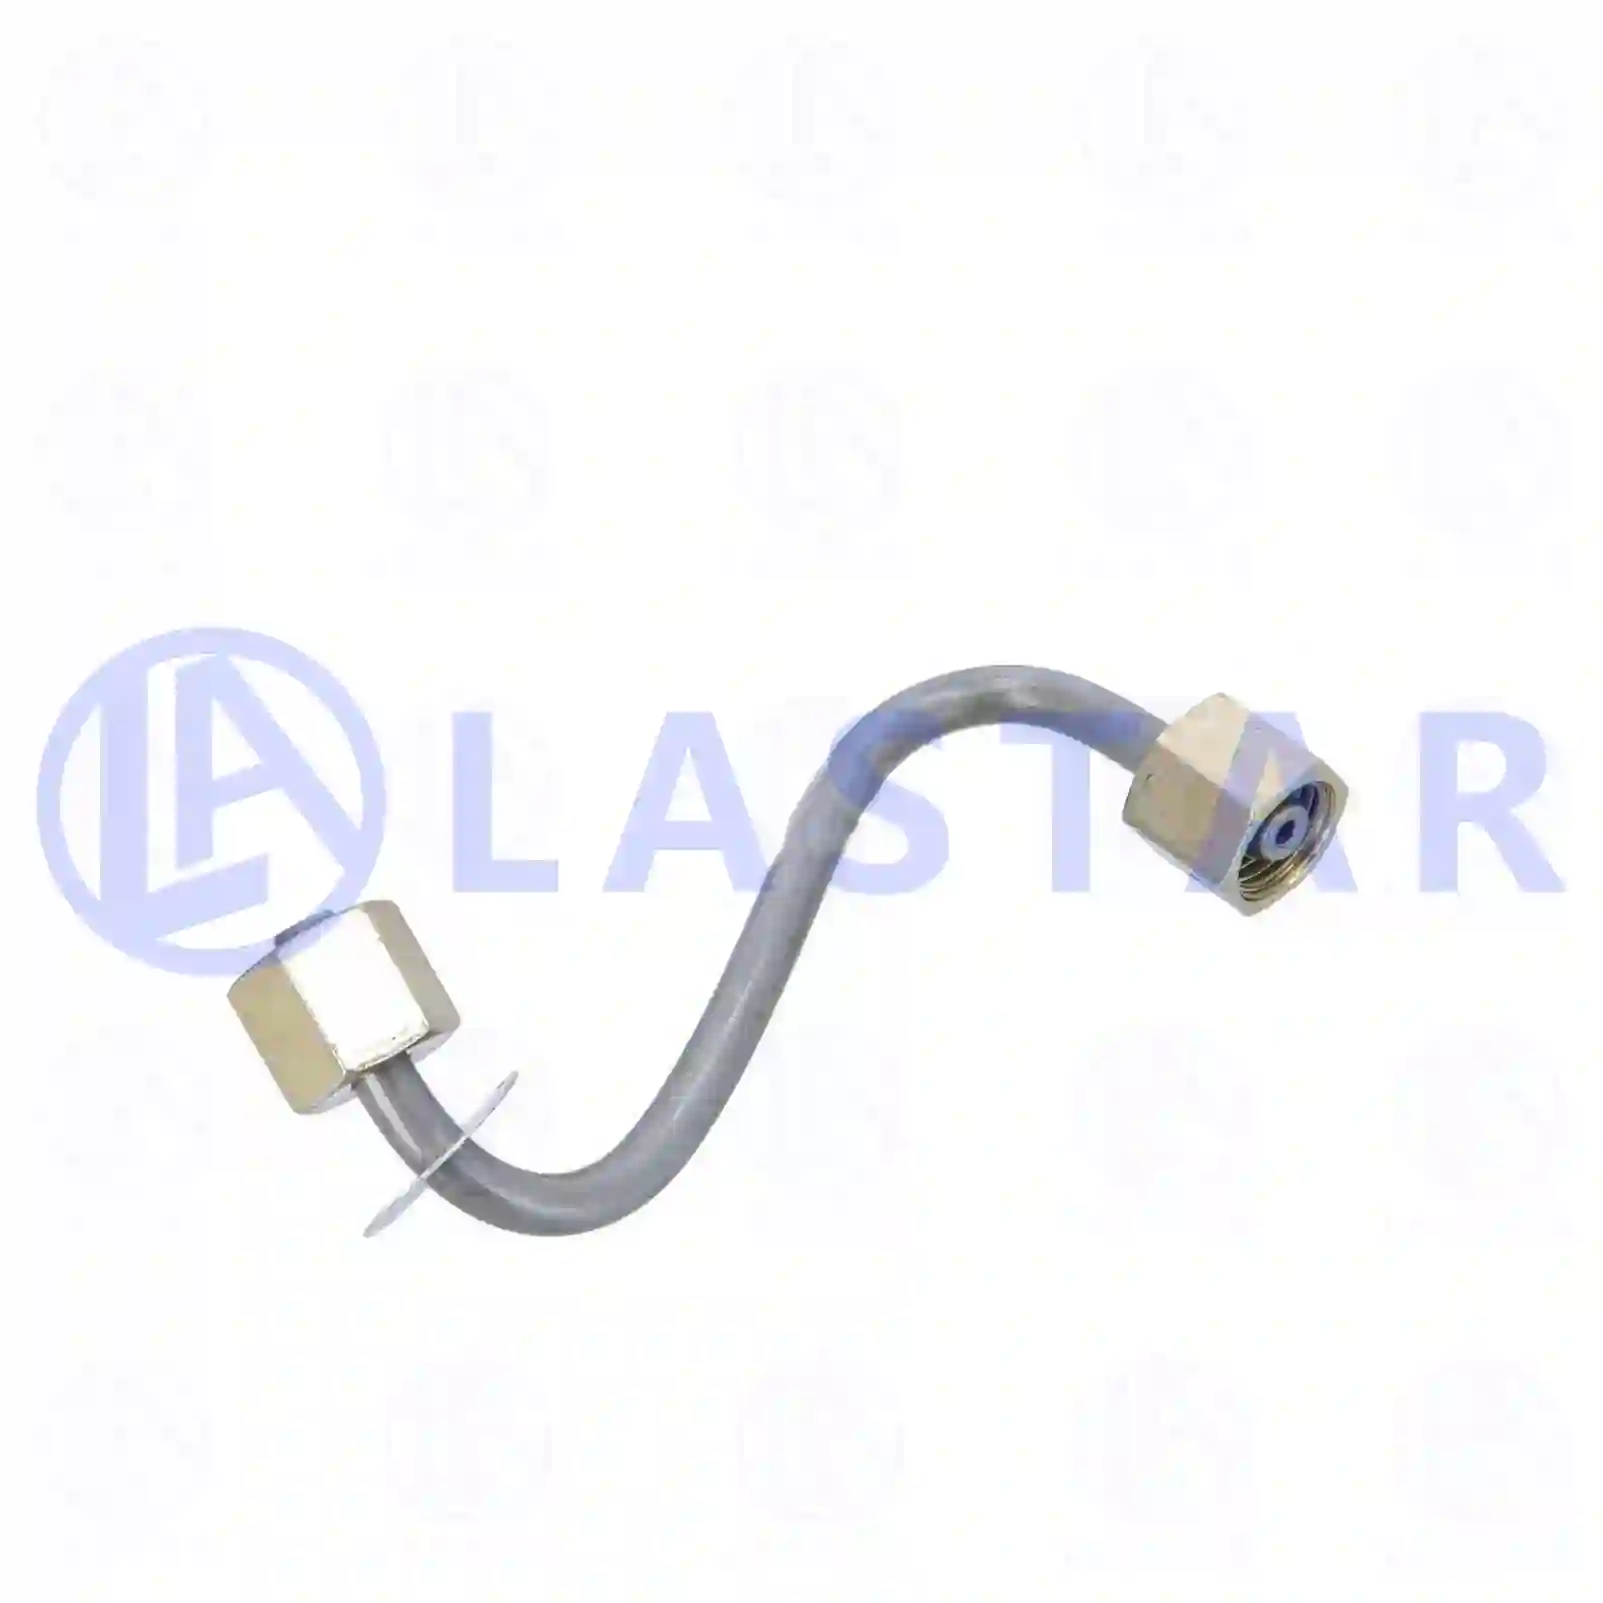 Injection line, 77723606, 6510702533, 65107 ||  77723606 Lastar Spare Part | Truck Spare Parts, Auotomotive Spare Parts Injection line, 77723606, 6510702533, 65107 ||  77723606 Lastar Spare Part | Truck Spare Parts, Auotomotive Spare Parts